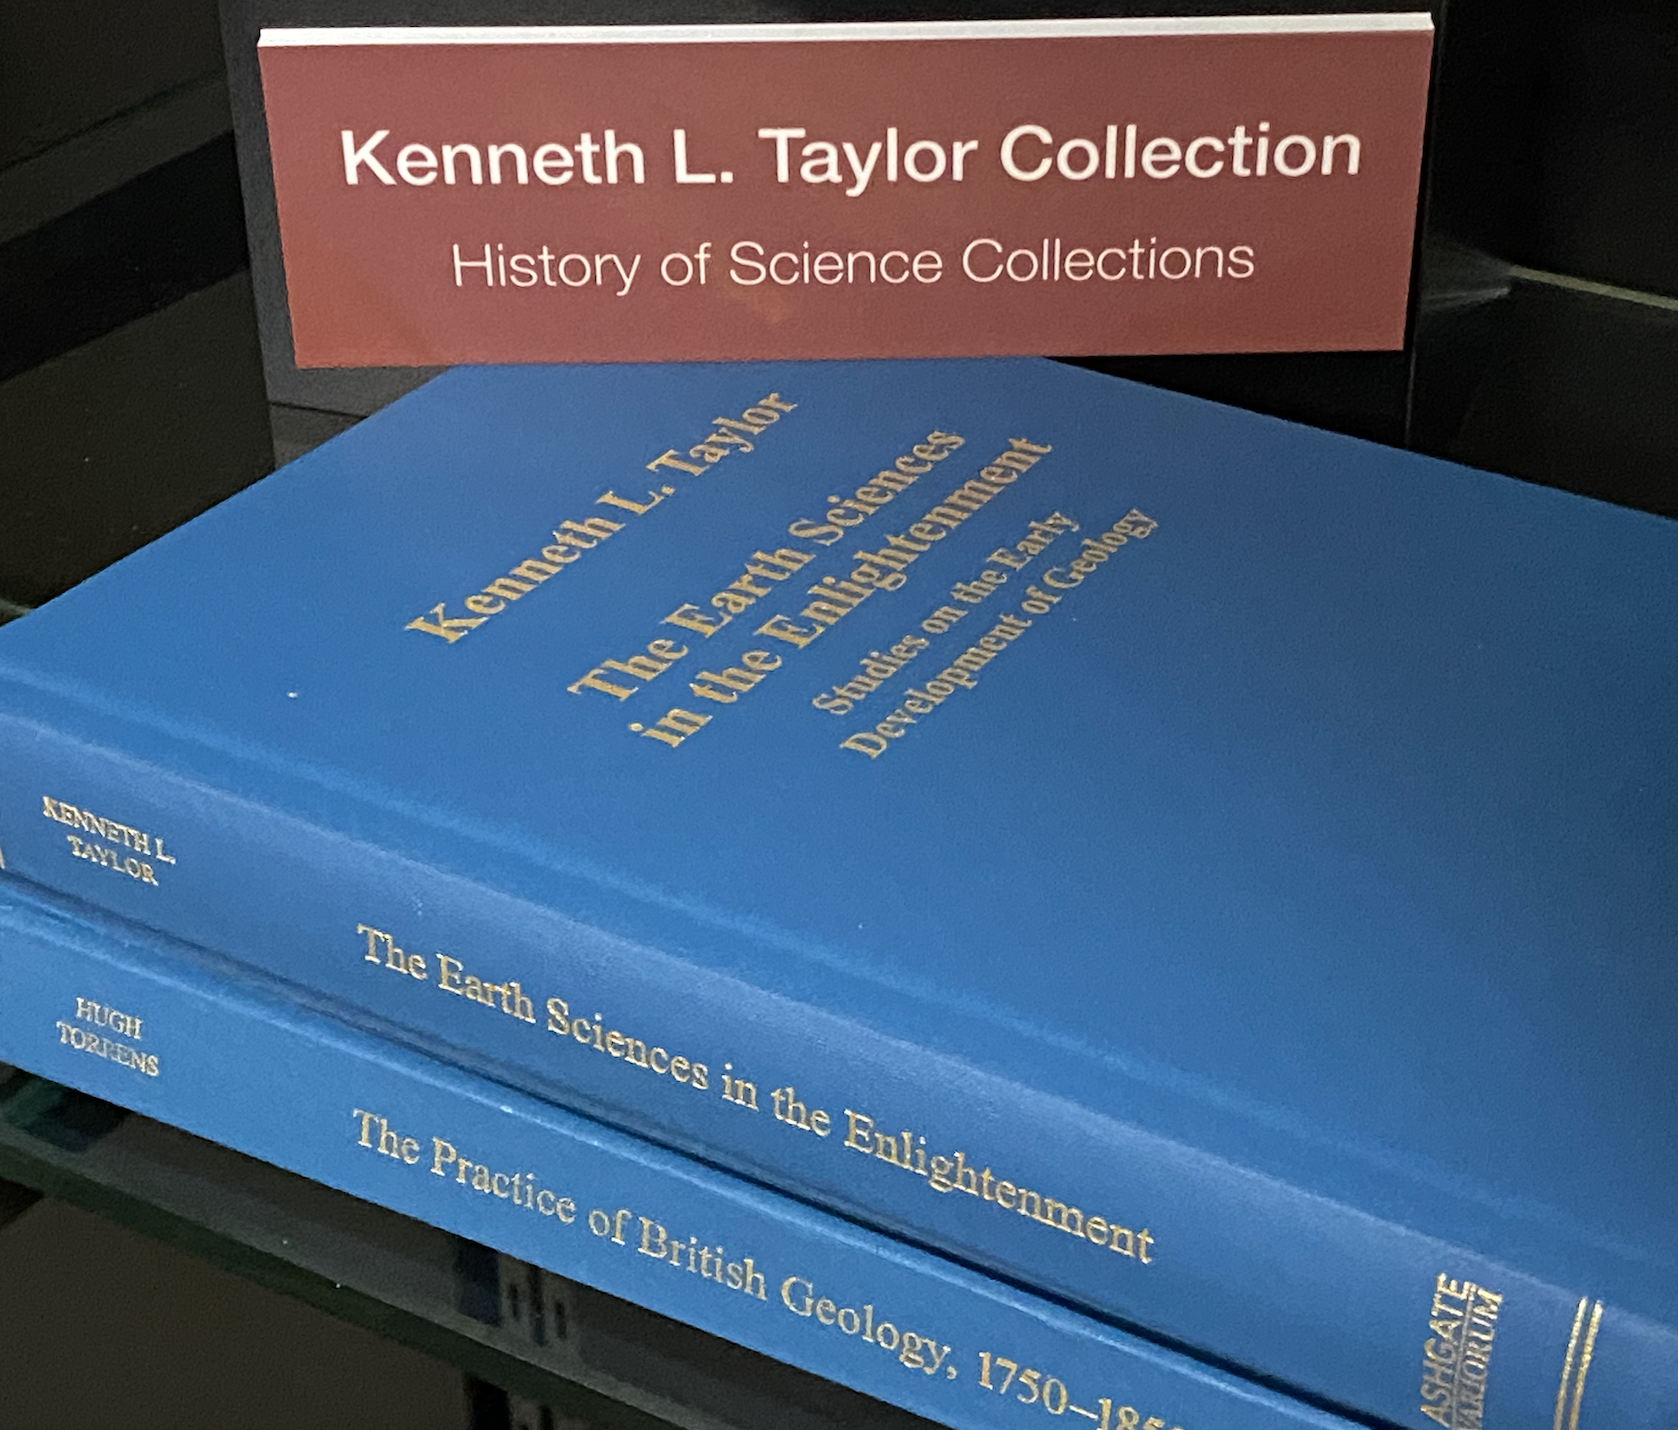 Photo of two blue books on shelf with sign for author/collection: Kenneth L. Taylor Collection